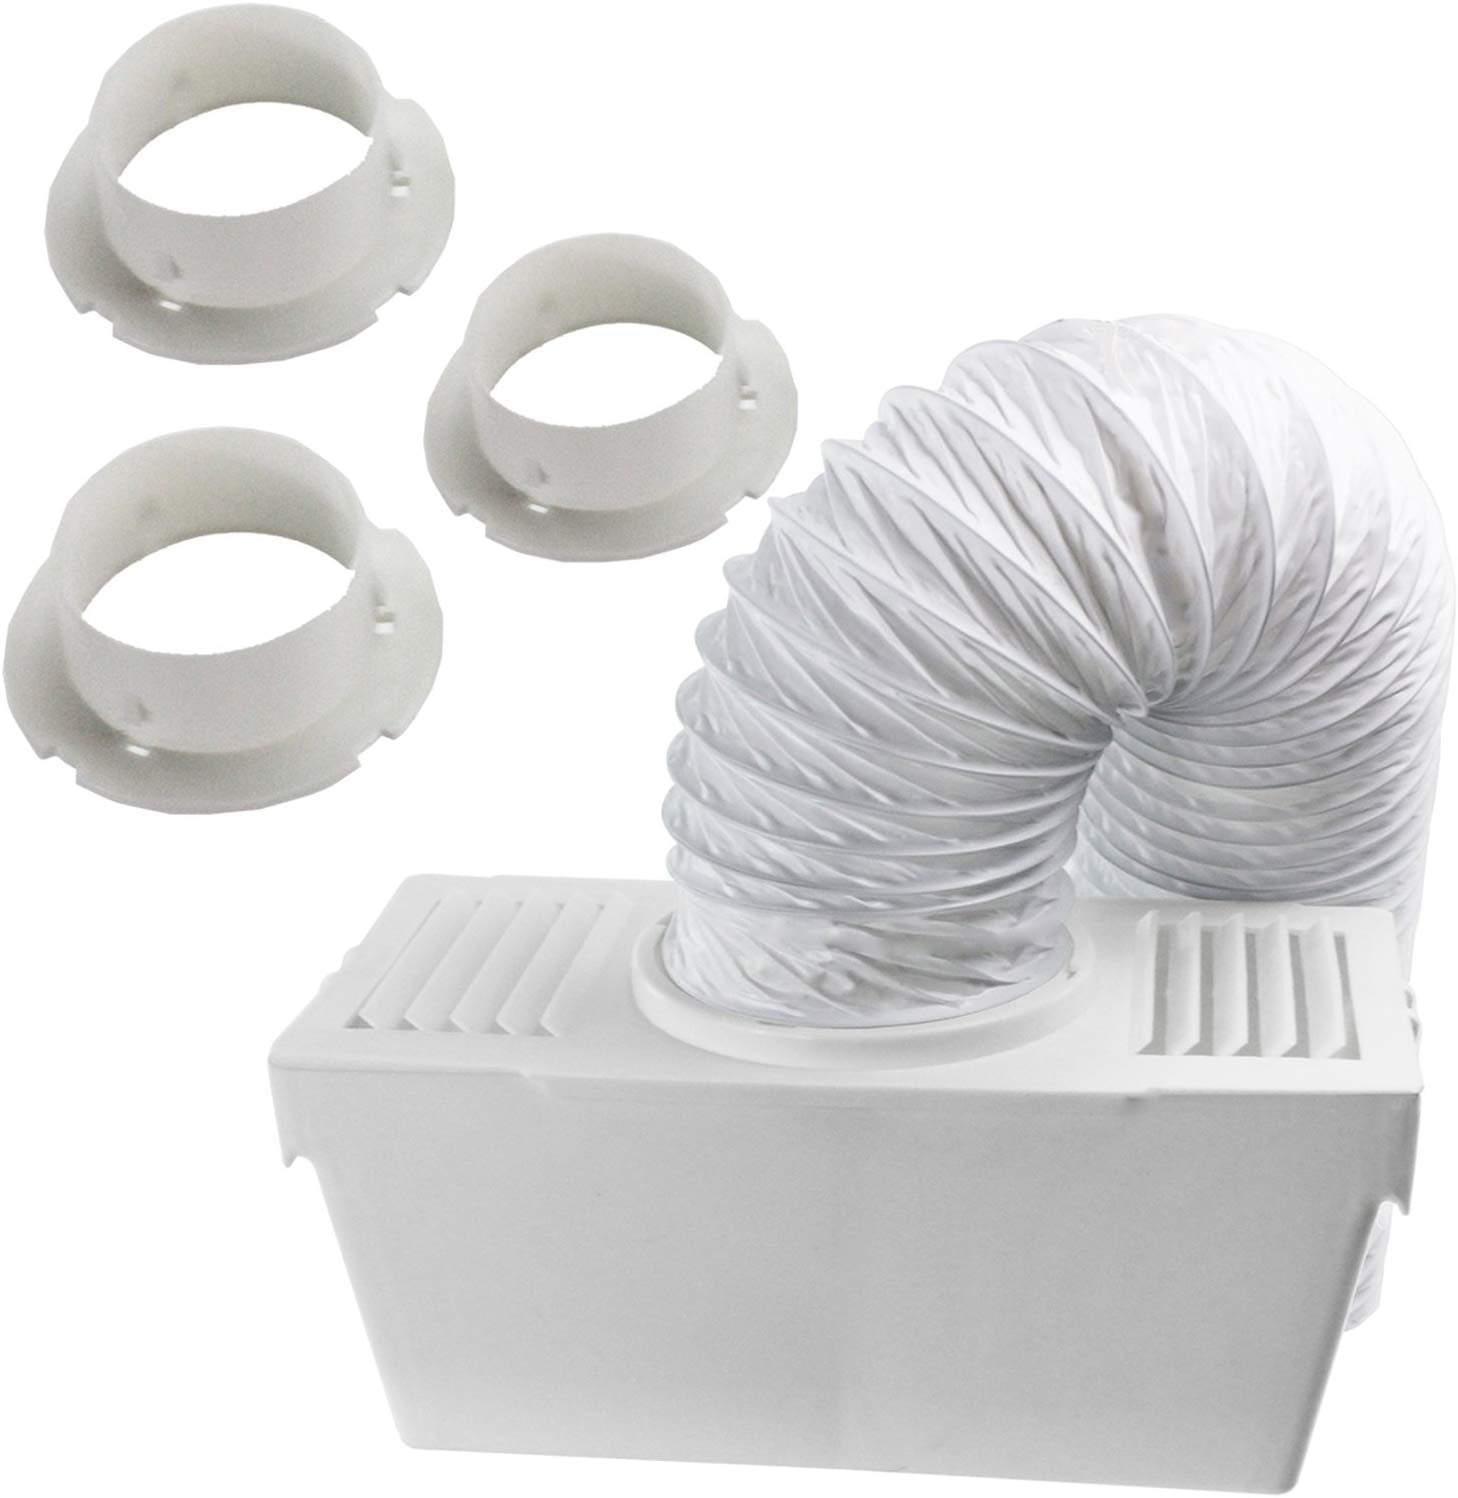 Vent Hose Condenser Kit with 3 x Adapters for Neff Tumble Dryer (1.2m)